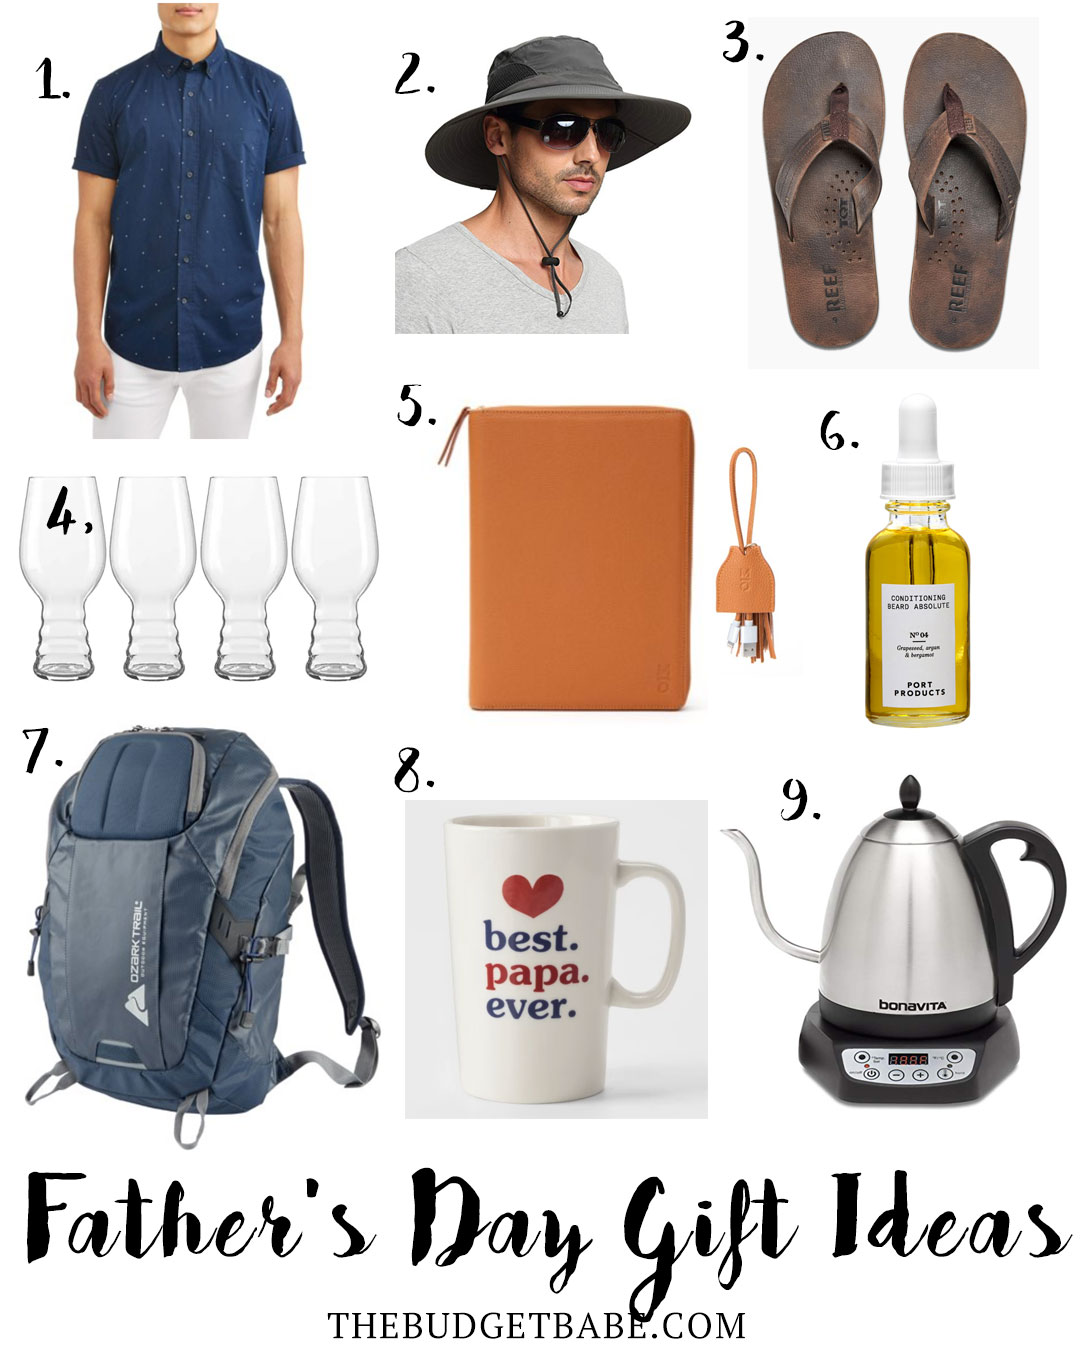 Father's Day gift ideas for any budget